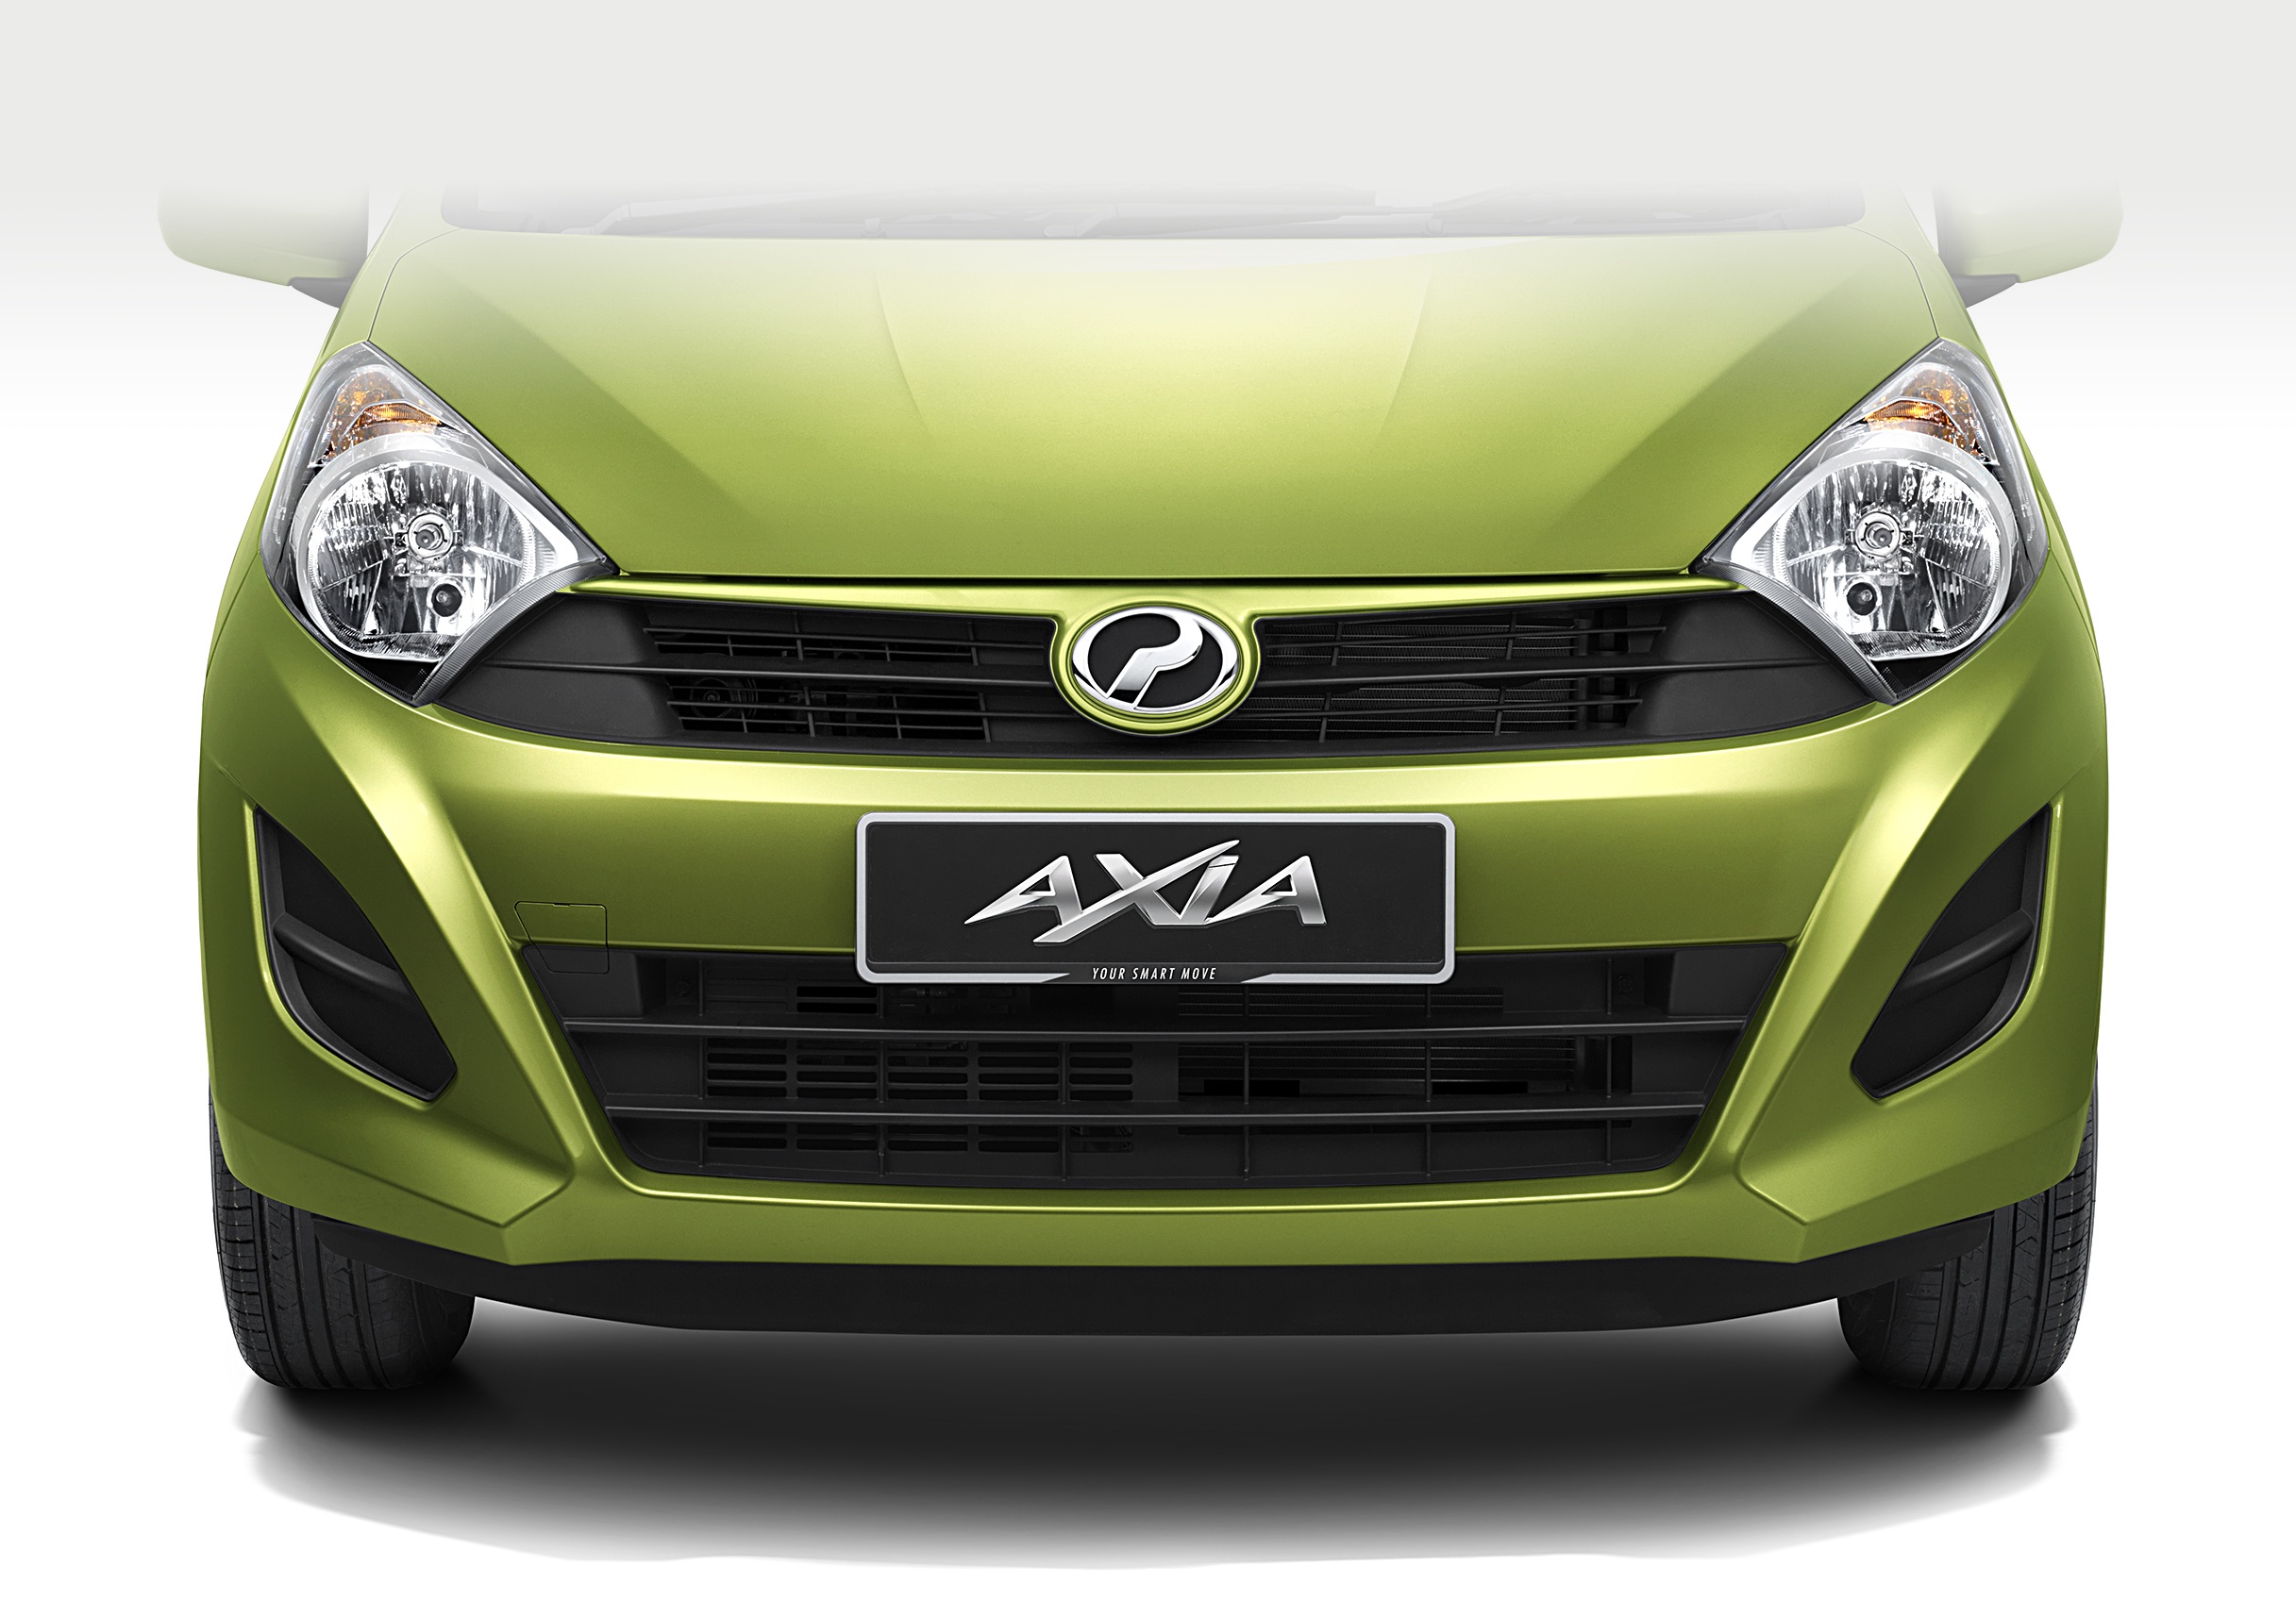 2014 Perodua Axia First Details On Specifications And Prices Of The 1 0 Litre E G Se And Advance Variants Paultan Org